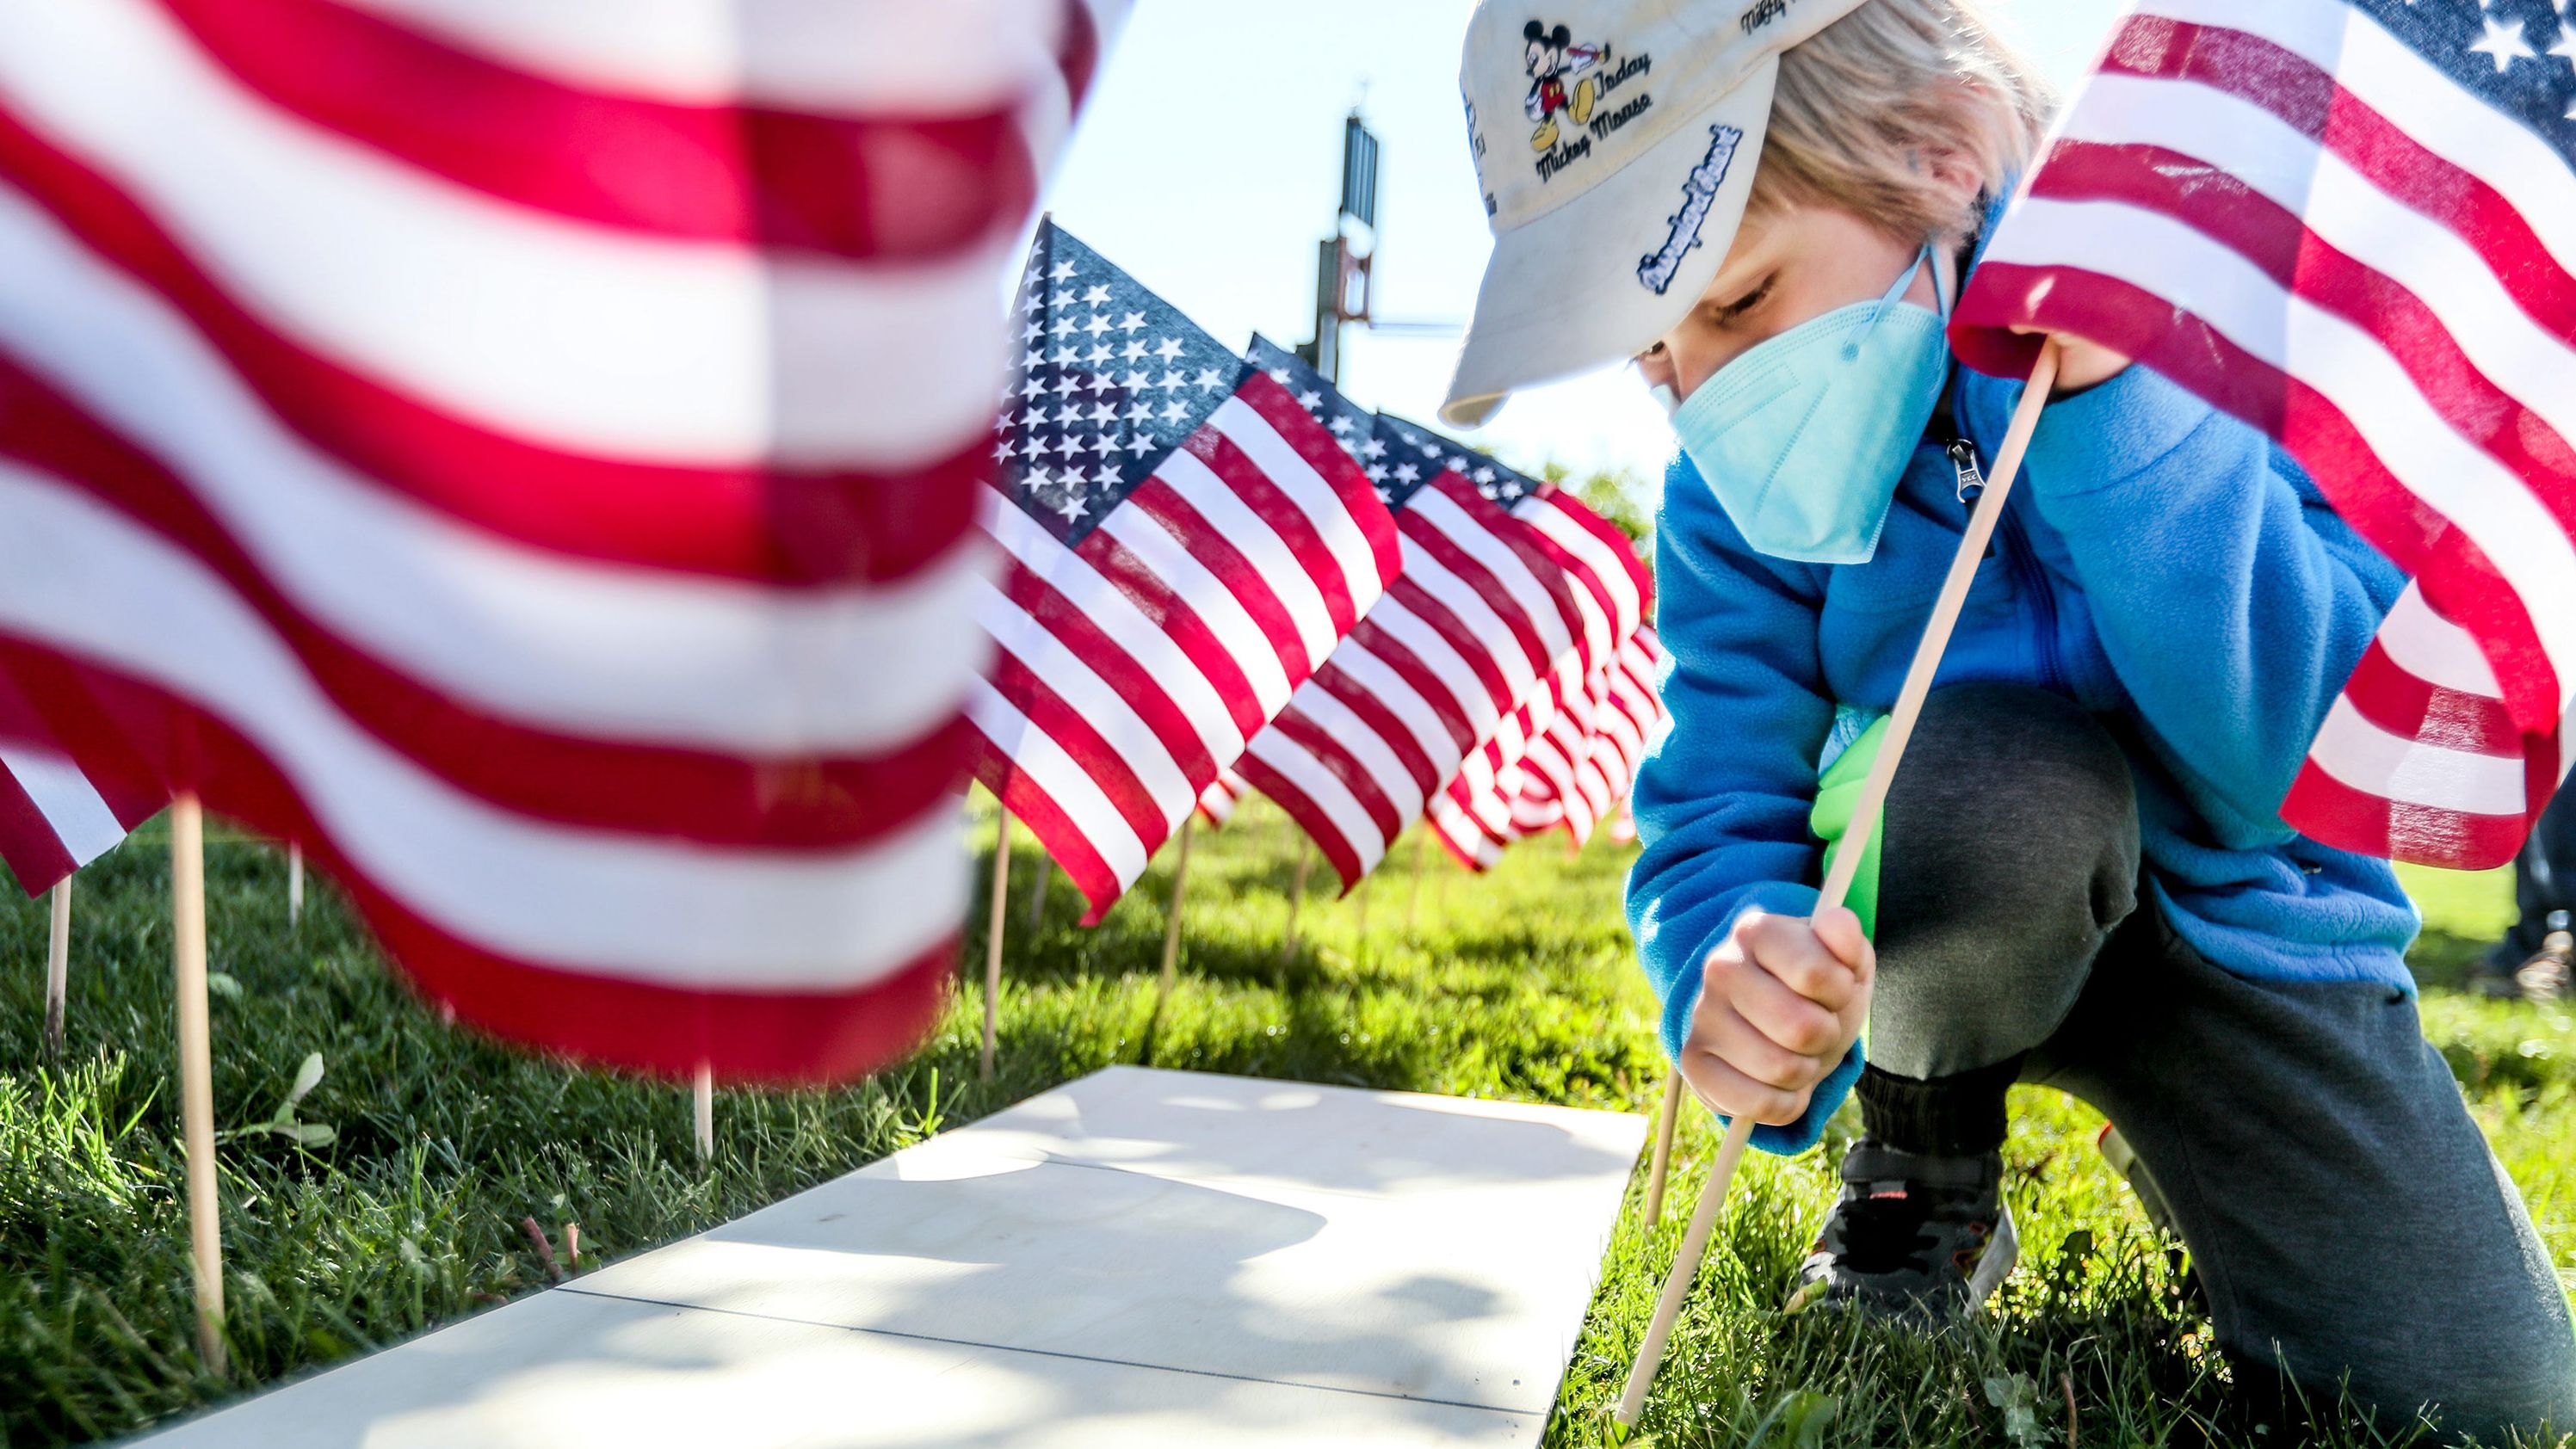 Elias Loosen plants a flag Saturday as part of the War Memorial Center's Field of Flags community event in Milwaukee.